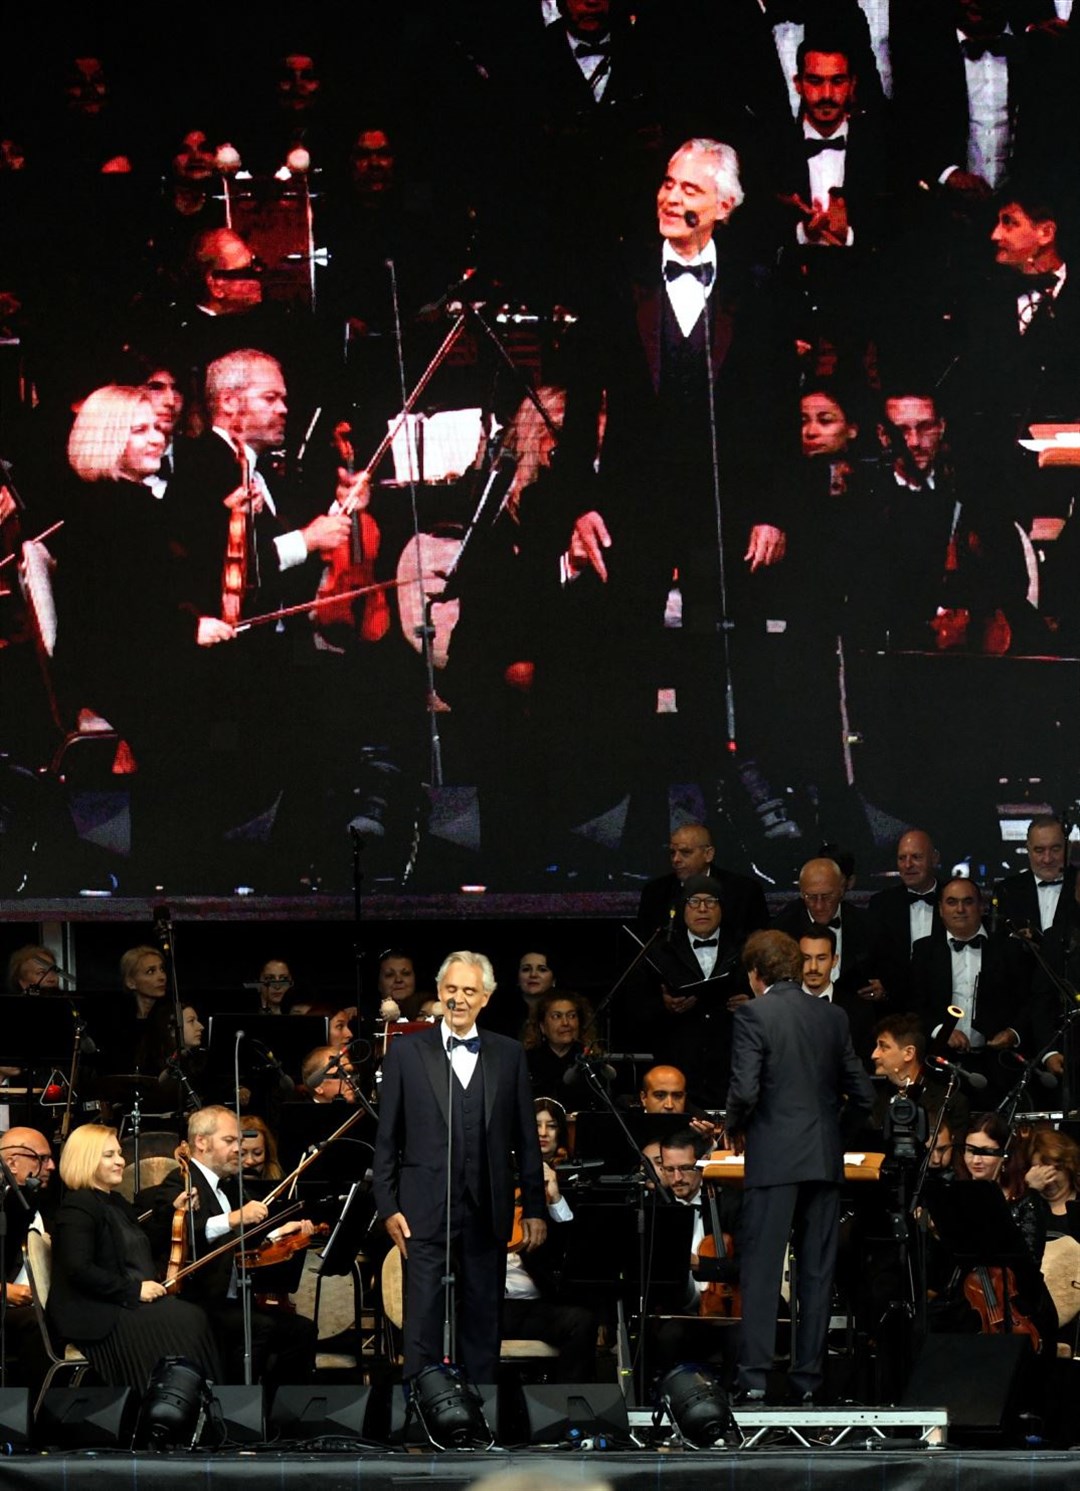 The big screen at the back of the stage meant the audience could get close-ups of Andrea Bocelli and the musicians and singers. Picture: James Mackenzie